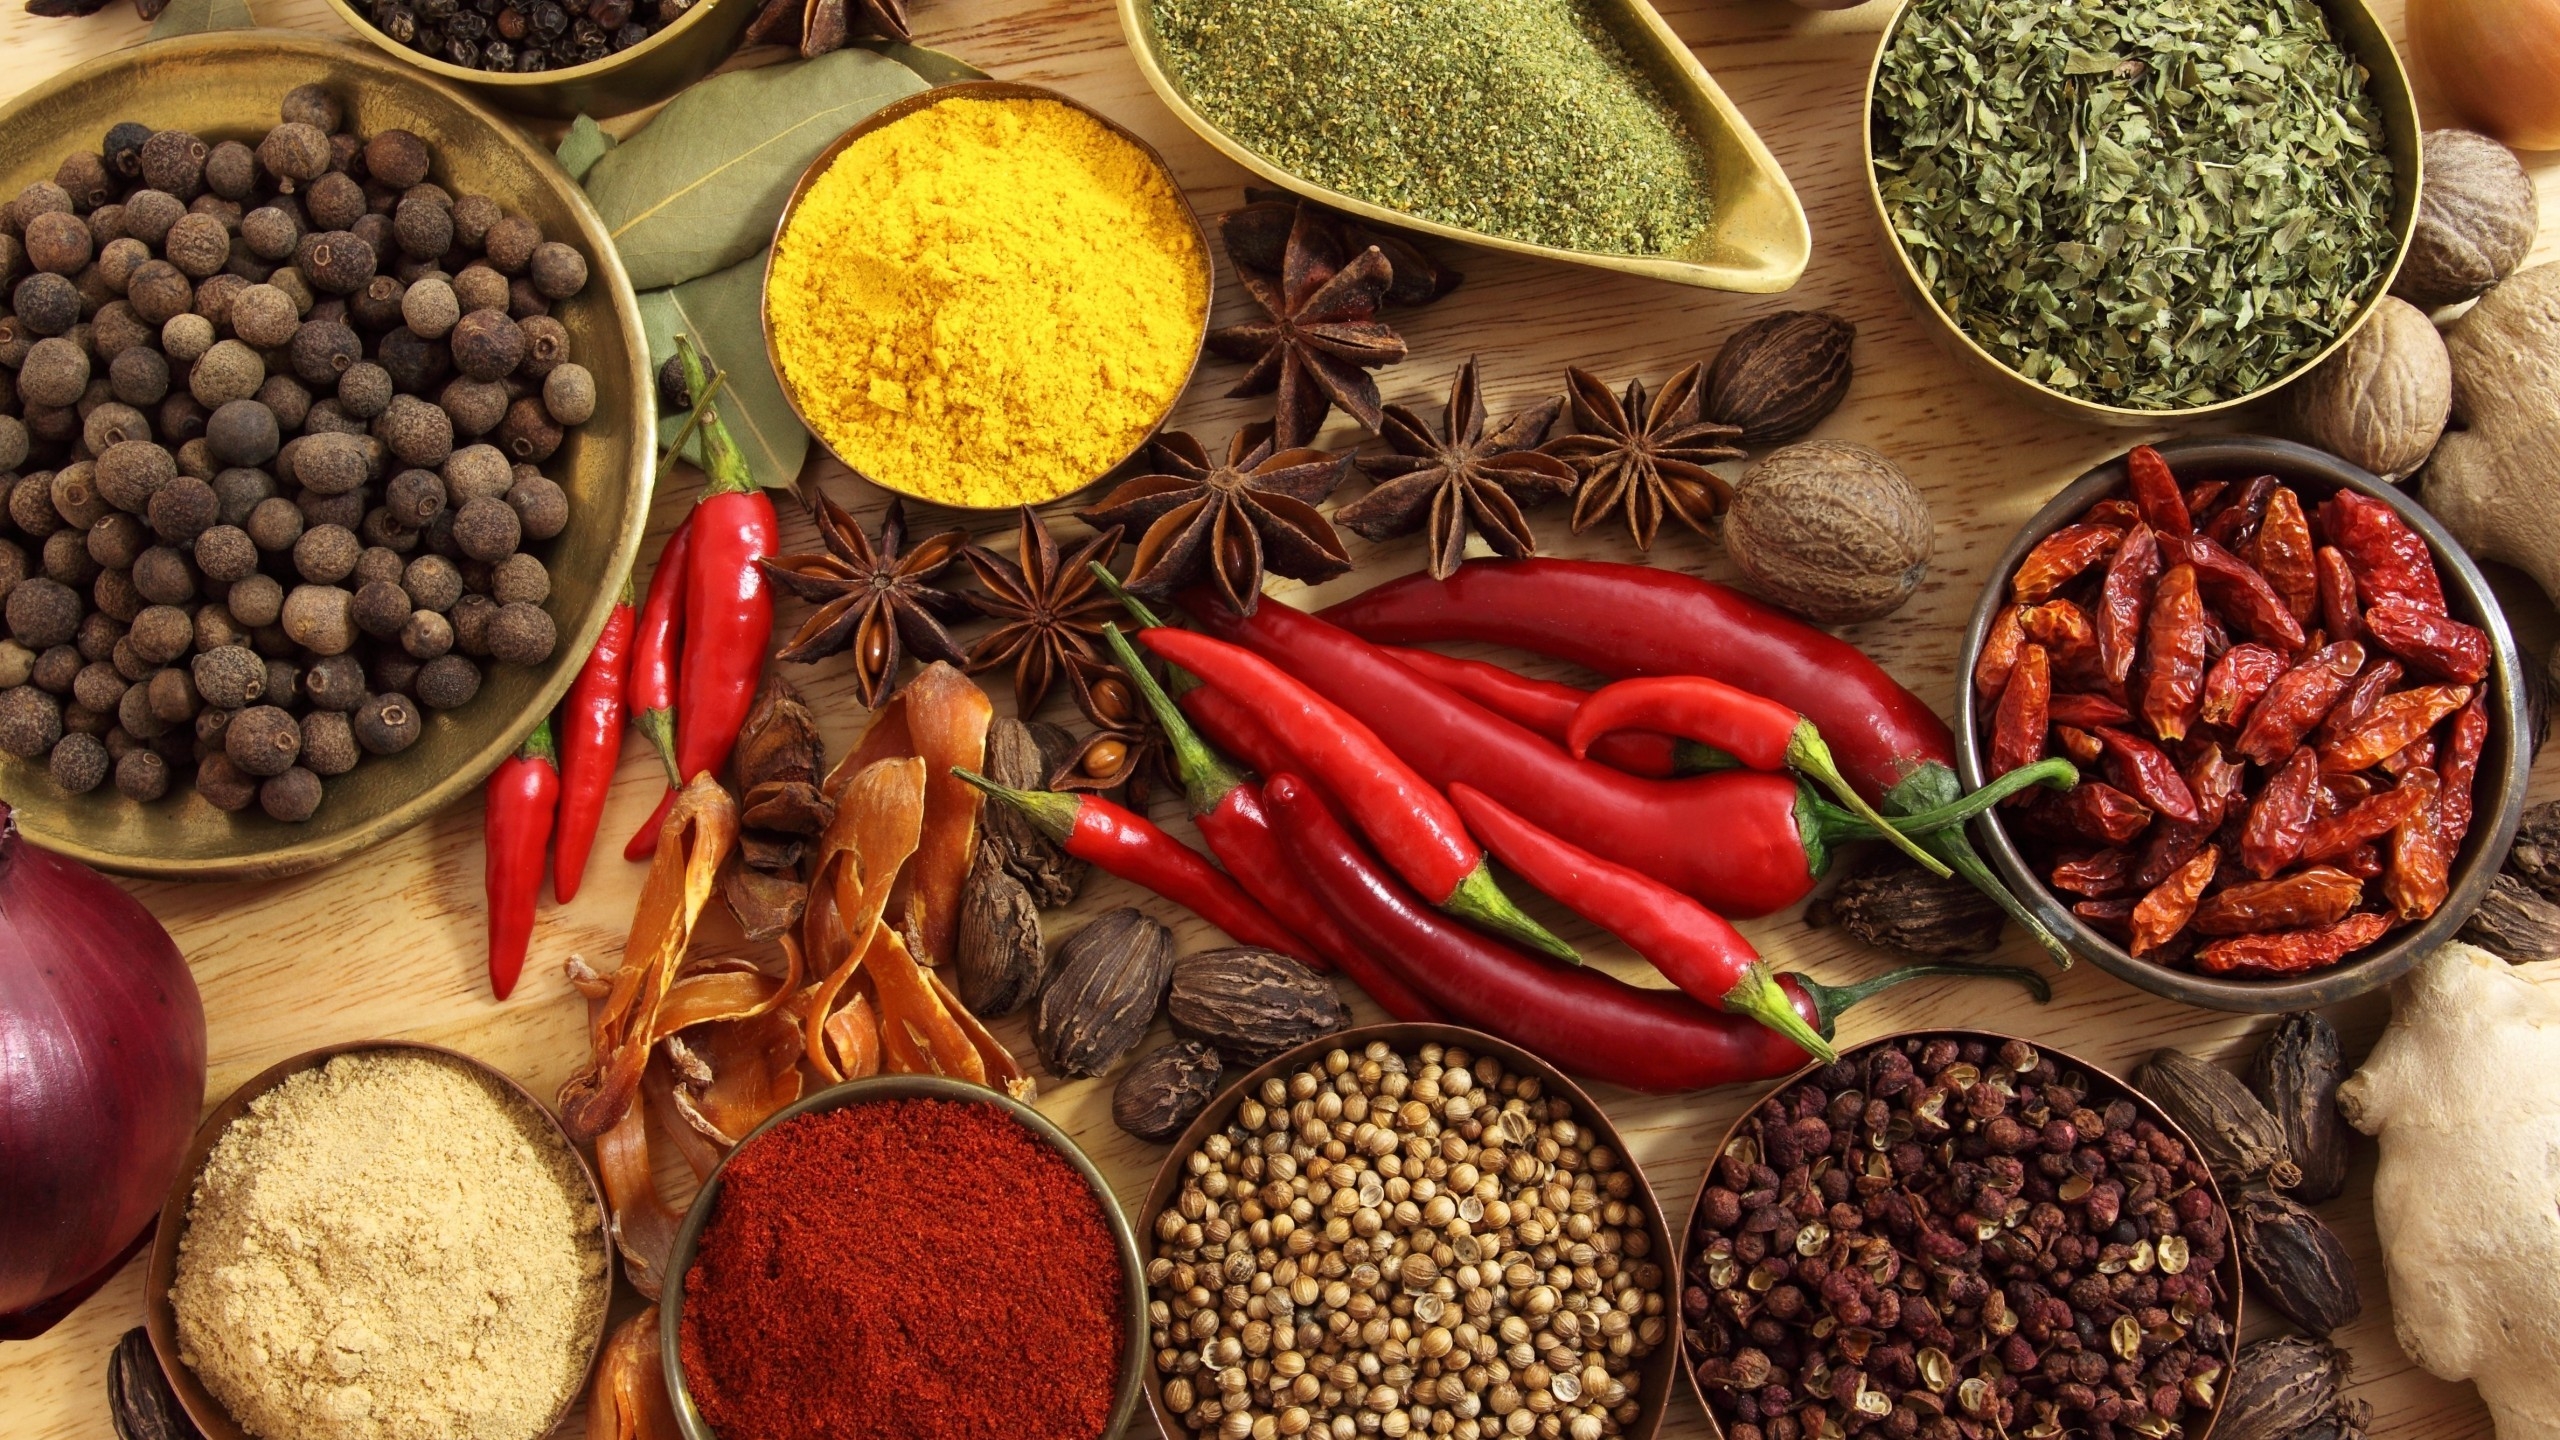 Spices Poster for 2560x1440 HDTV resolution